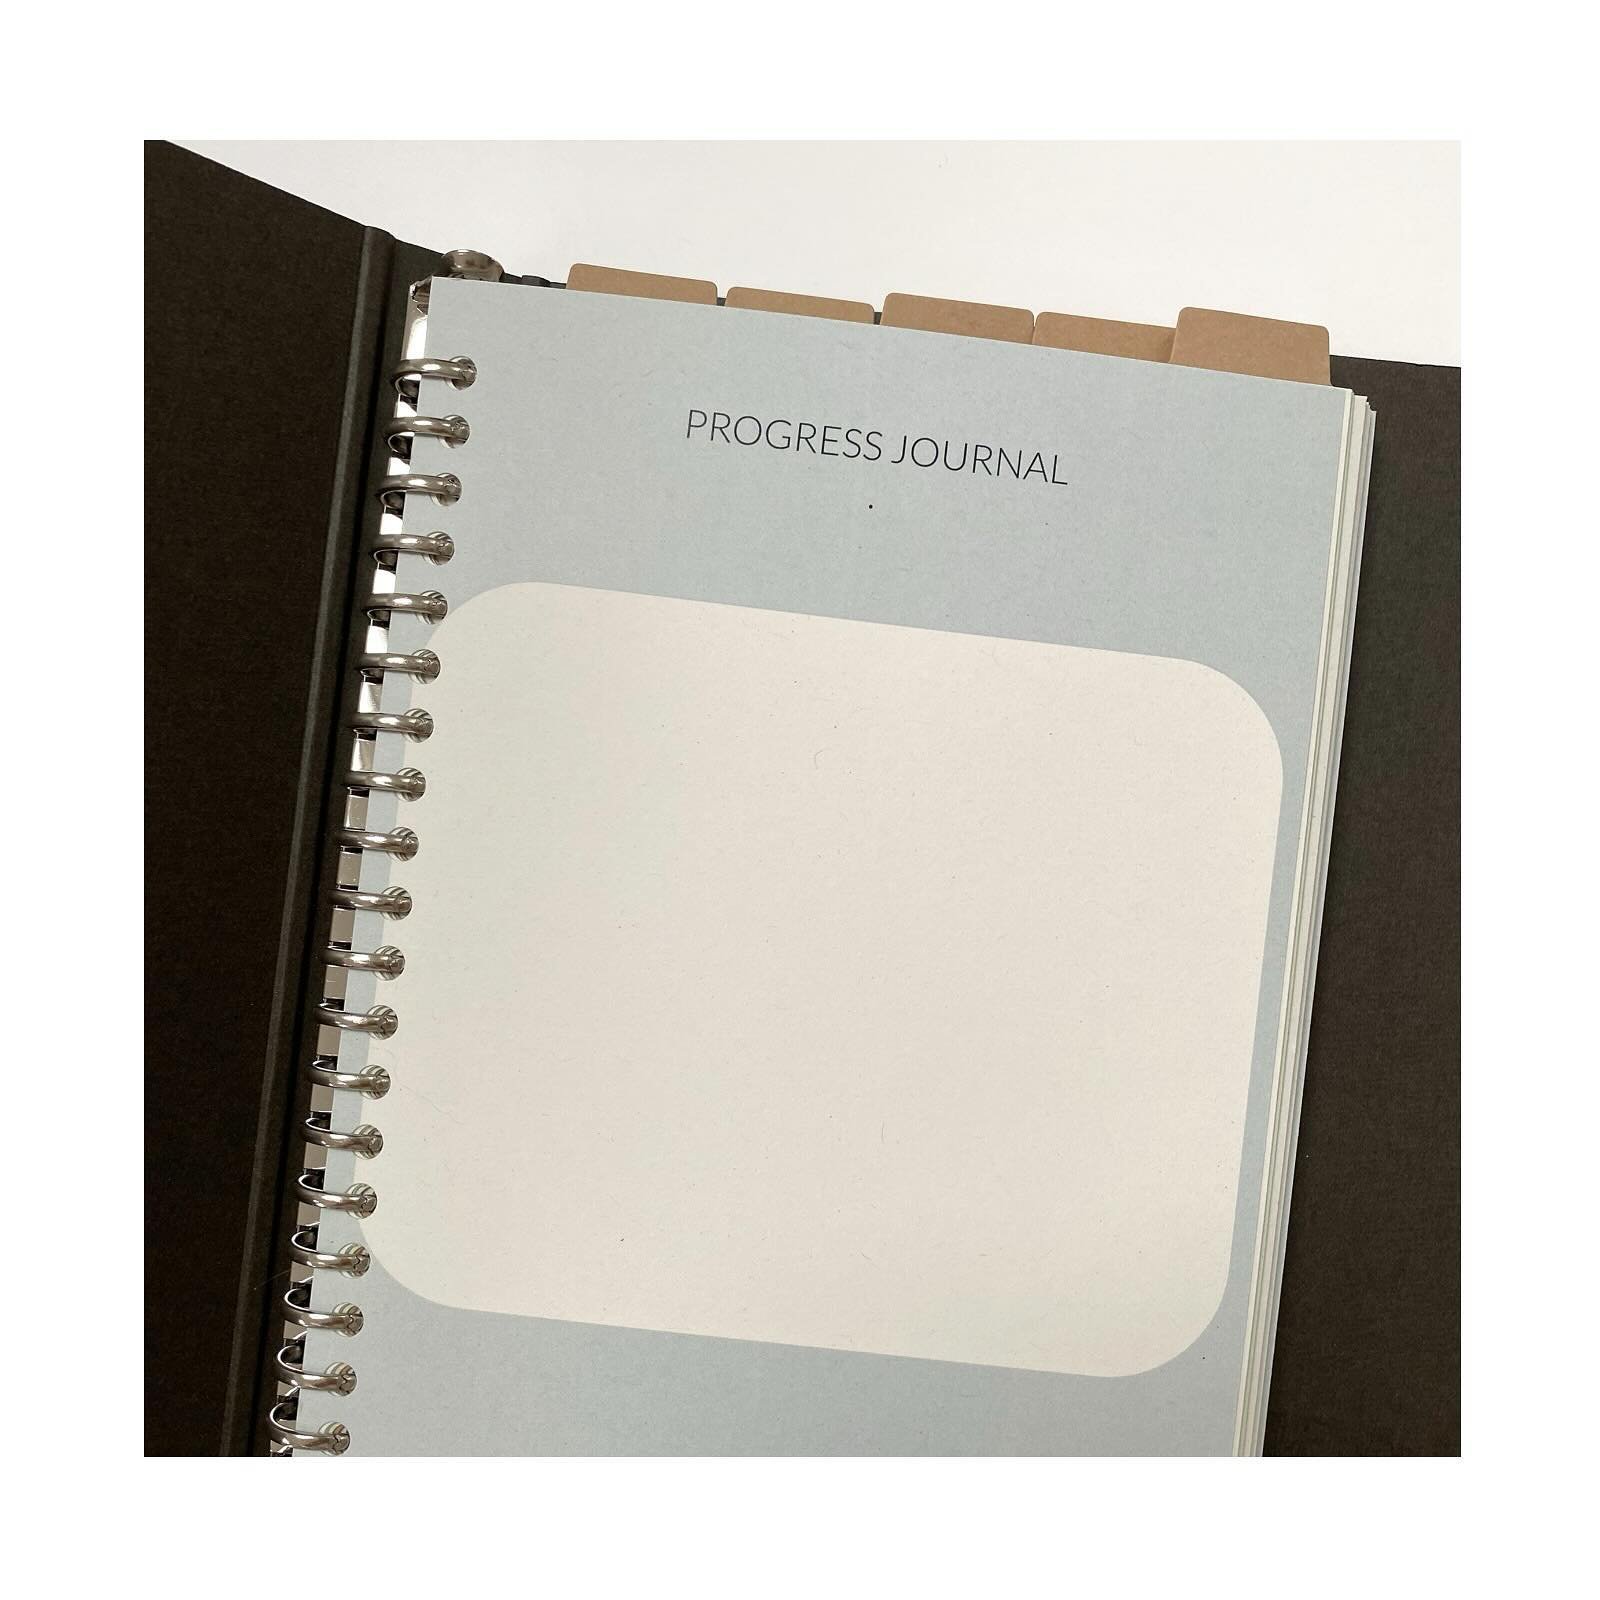 paper goods
a mini binder that unlocks training and learning for NVQ Hairstylists of the future&hellip; punched by us by hand.